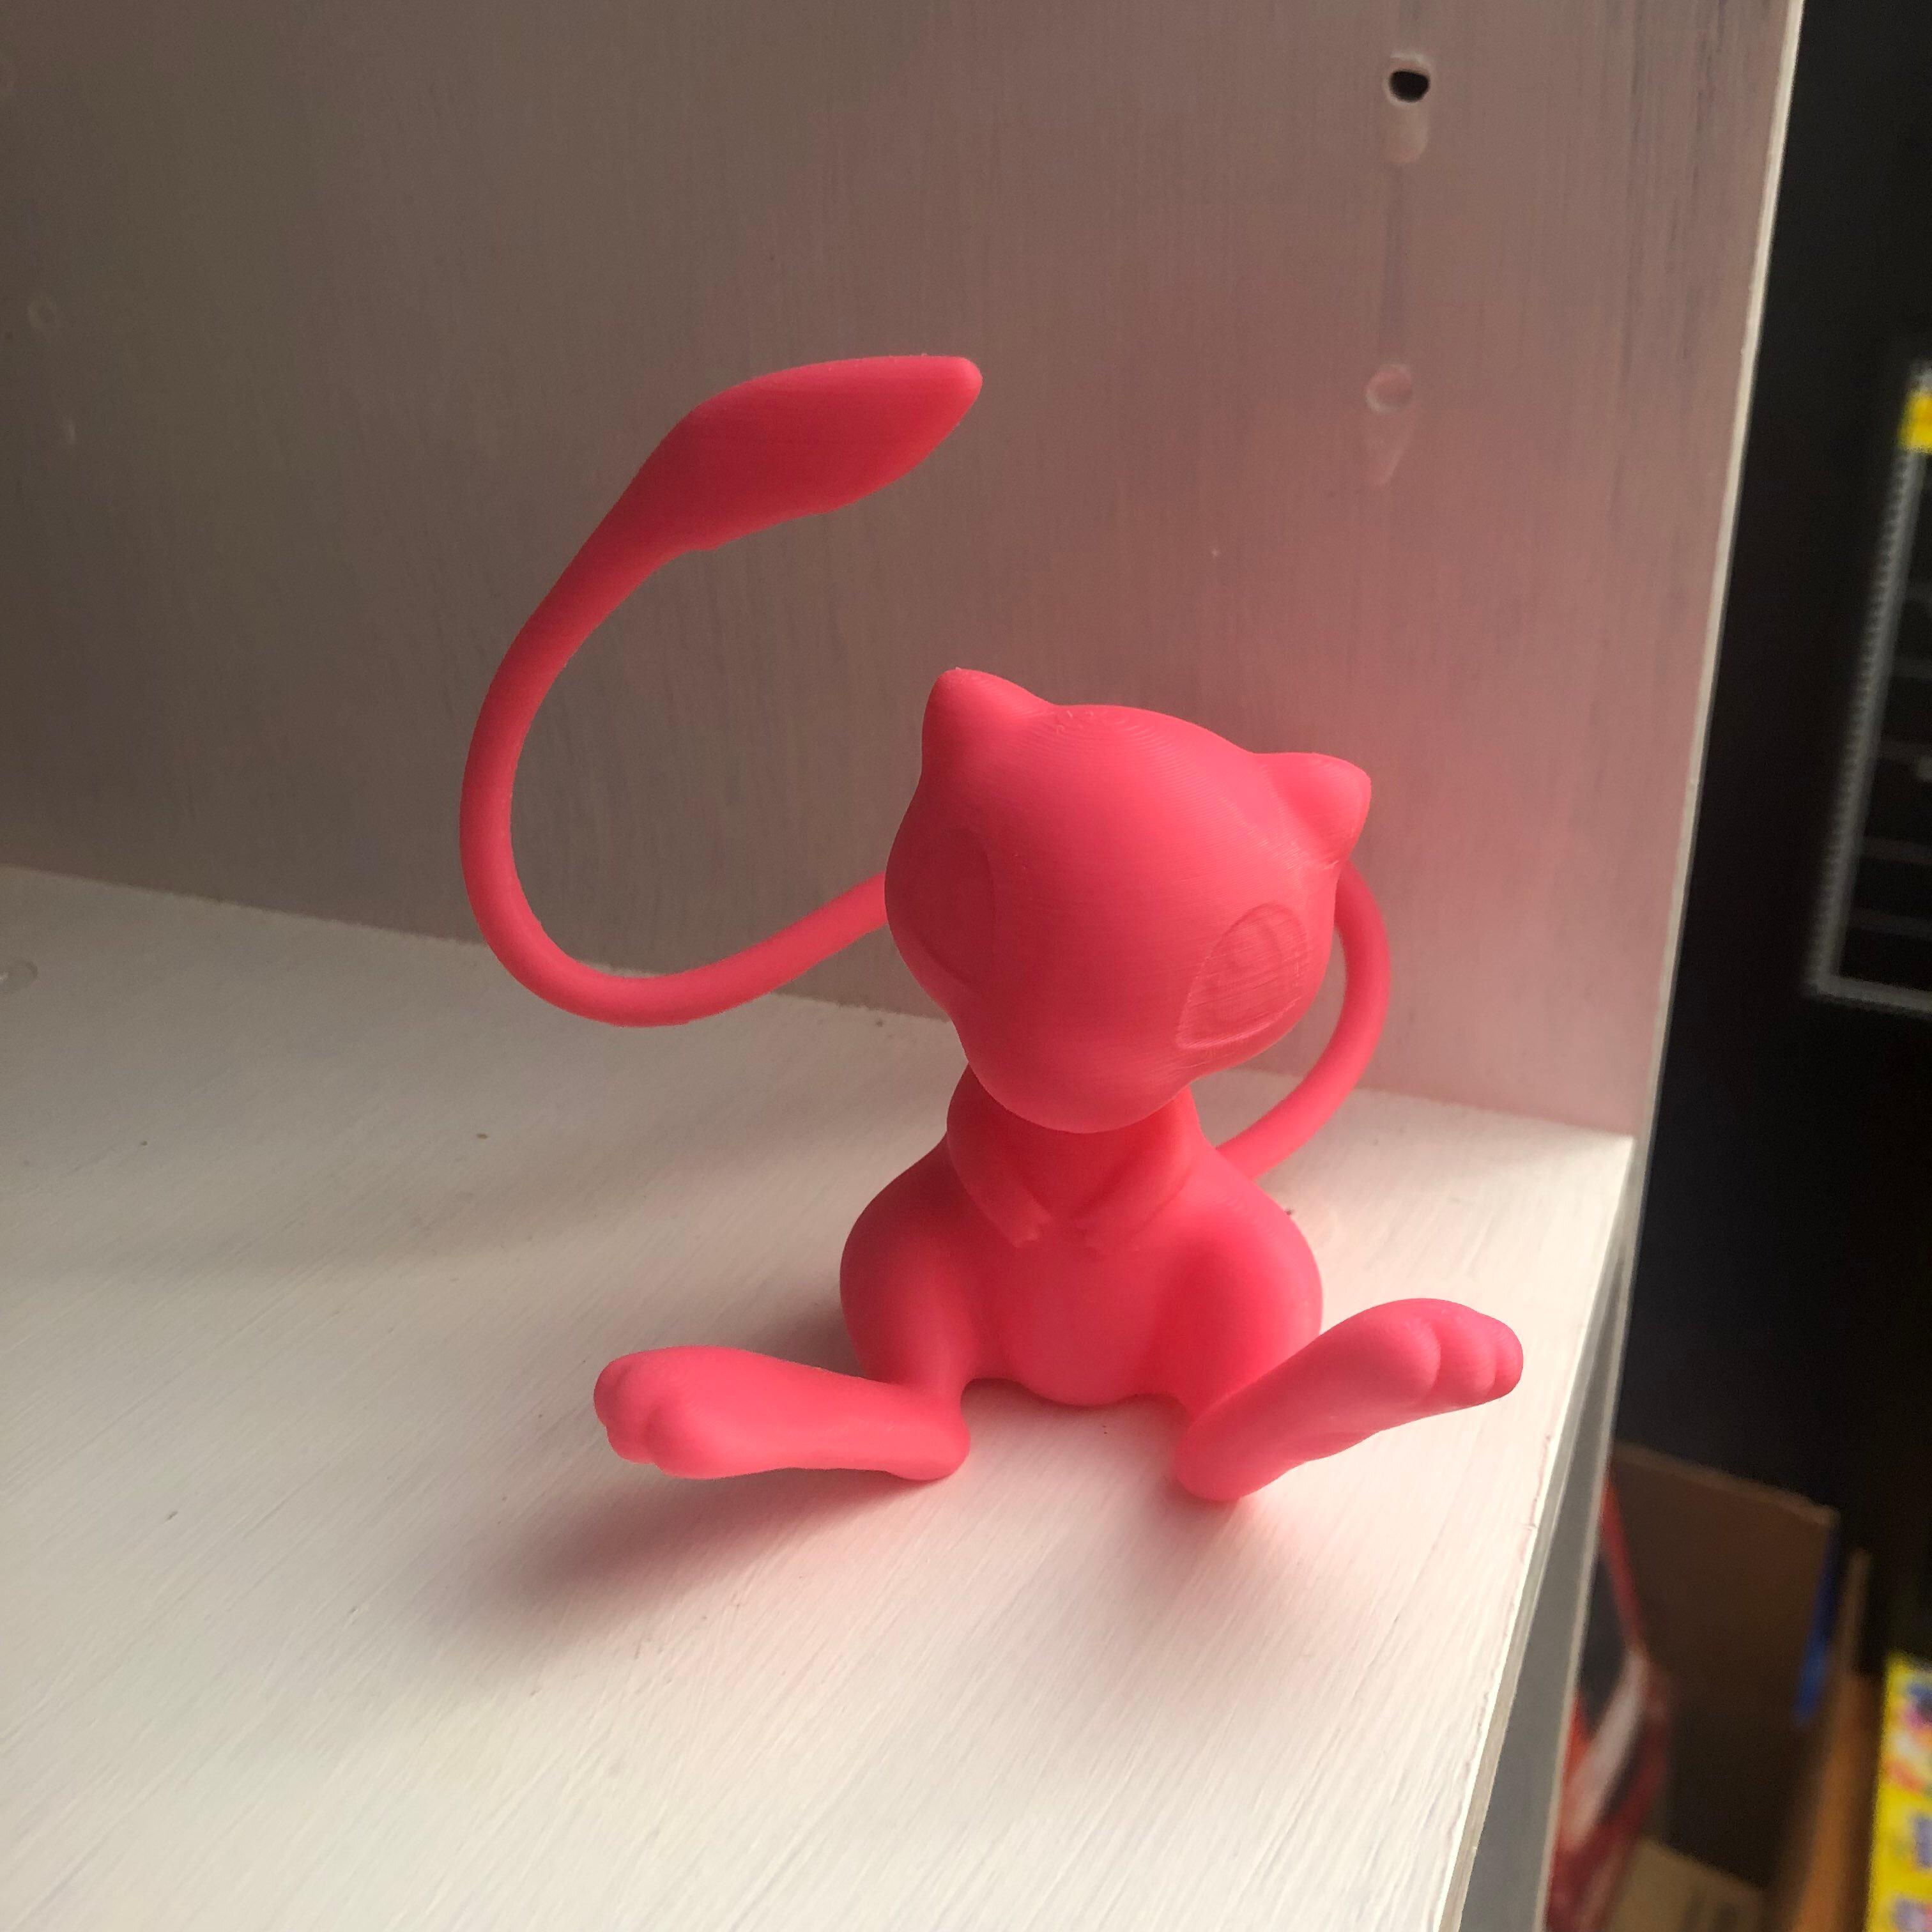 Mew(Pokémon) - Printed on Prusa MK3S.  .2mm layer height with a .4 mm nozzle. Printed in Matterhackers Pink PLA. 
 - 3d model